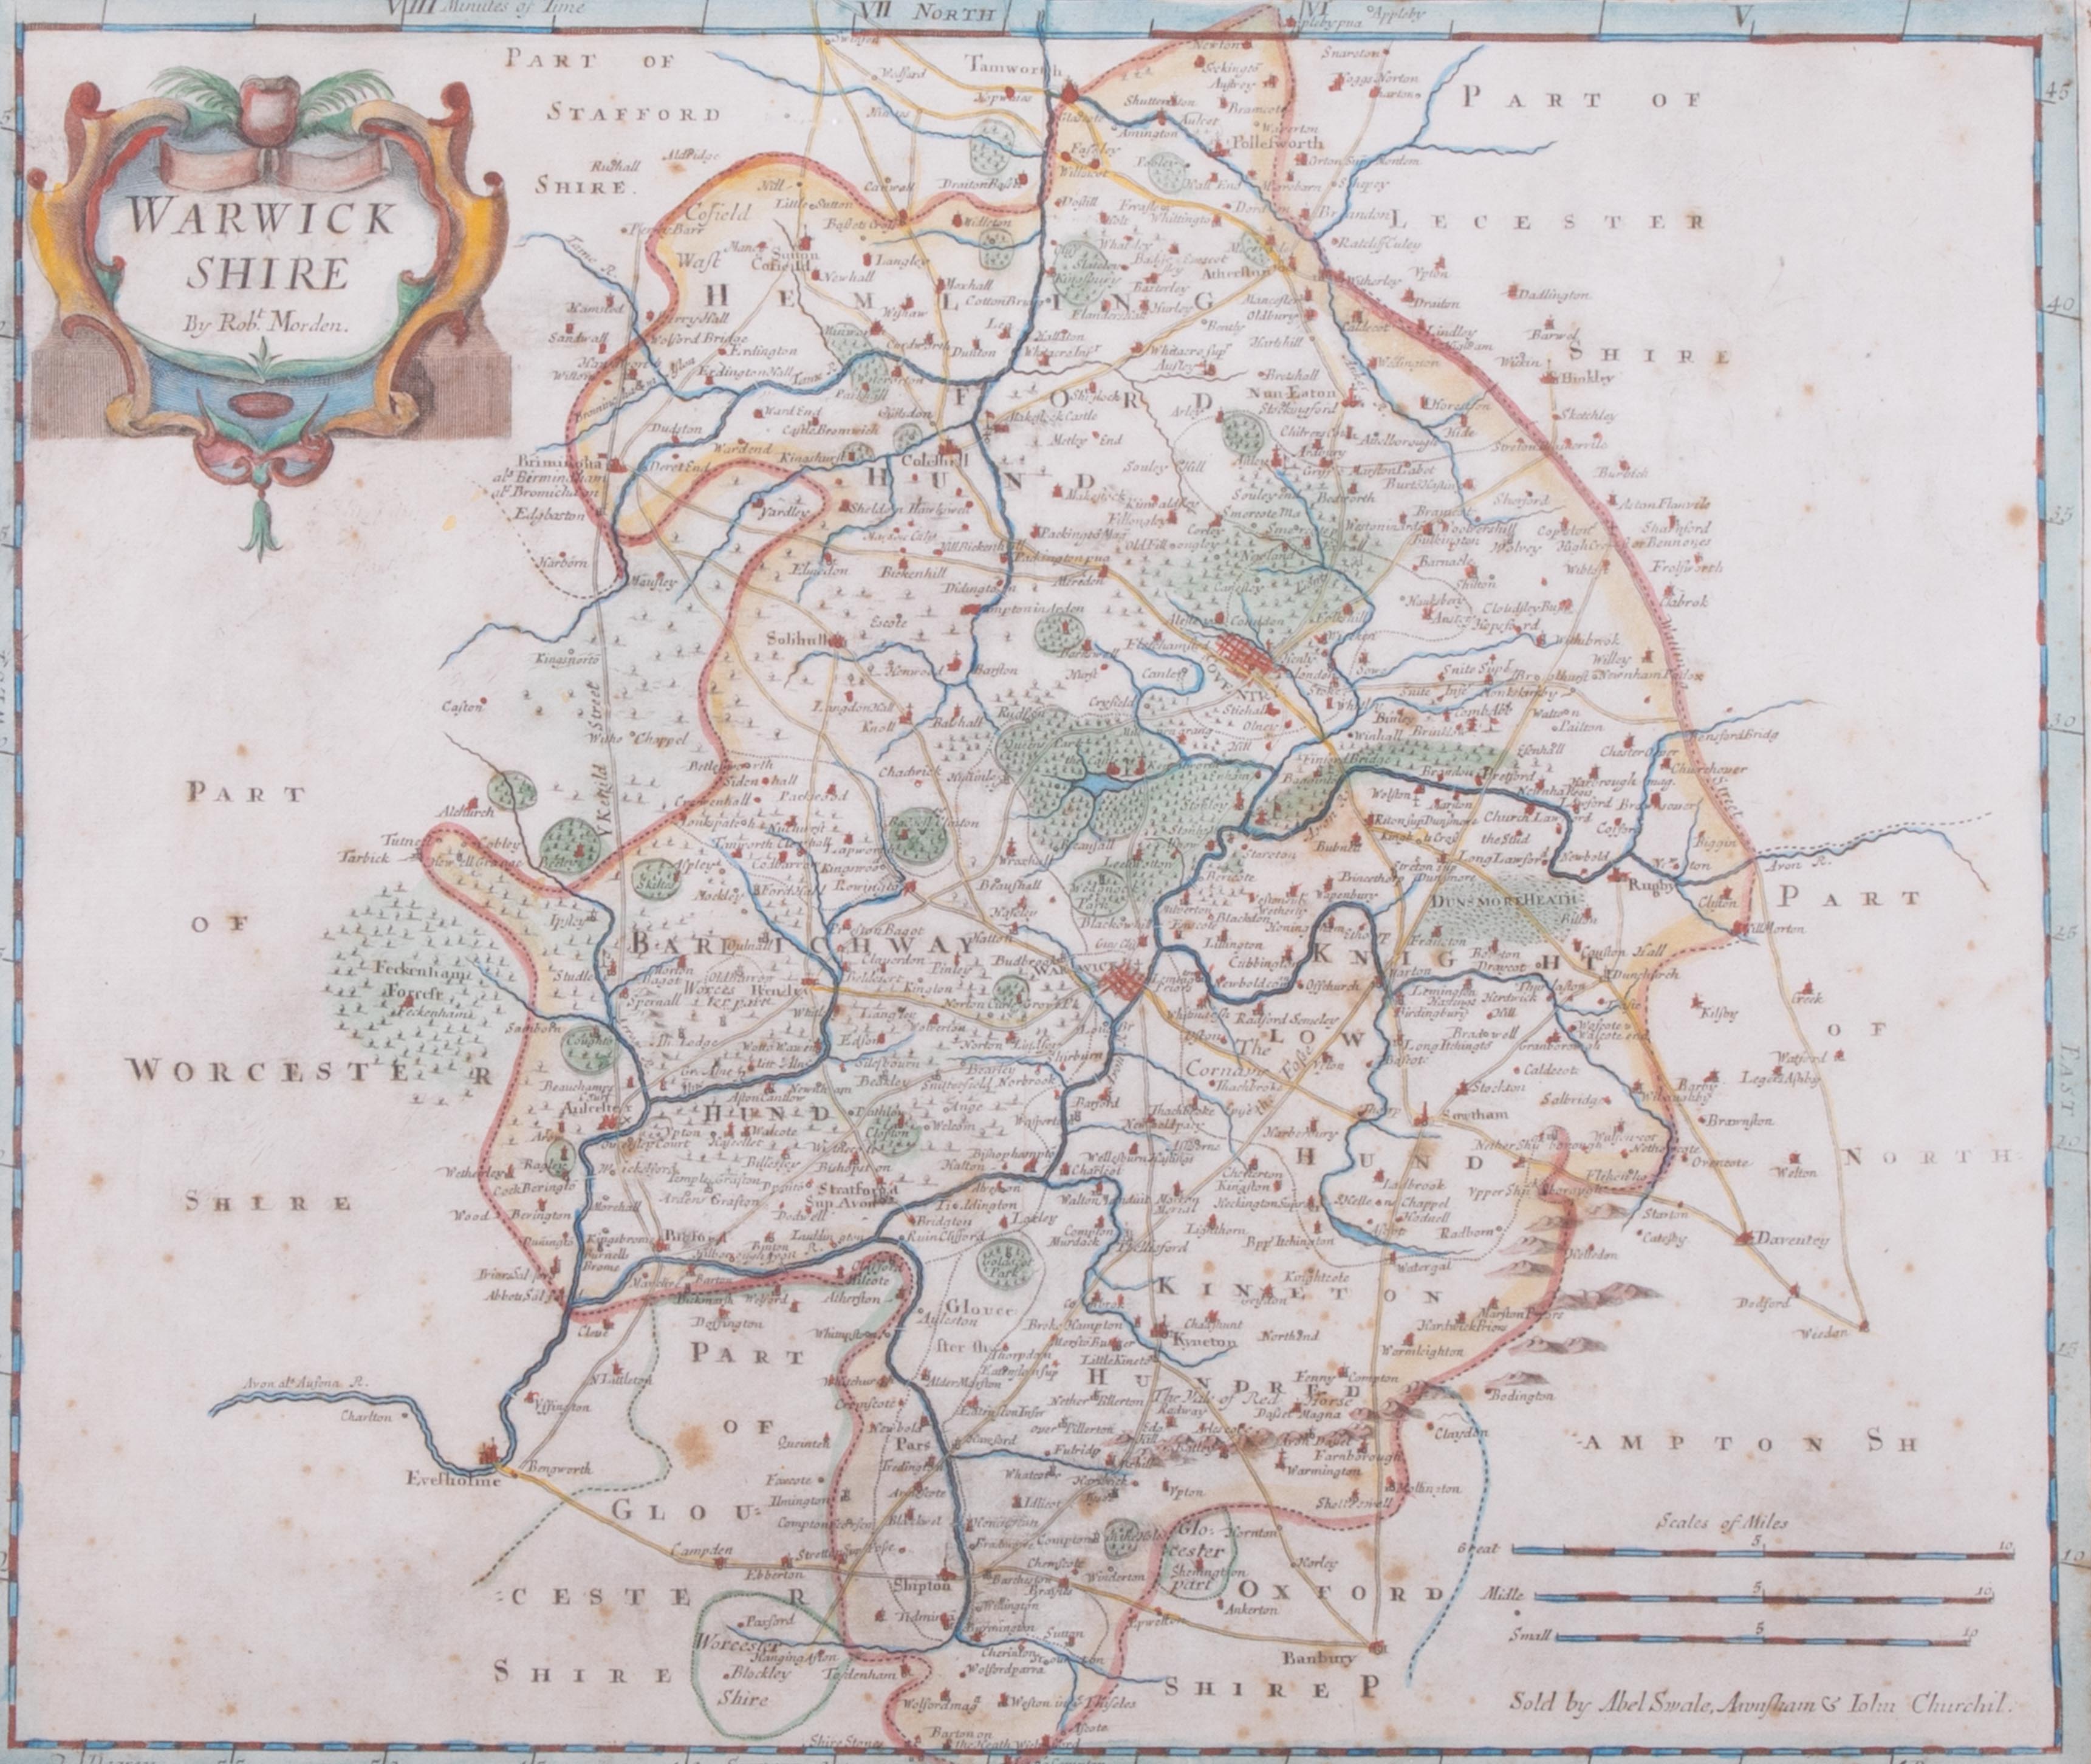 Robert Morden, a map of Warwickshire, sold by Abel Swale, 37cm x 43cm, framed and glazed. - Image 2 of 2